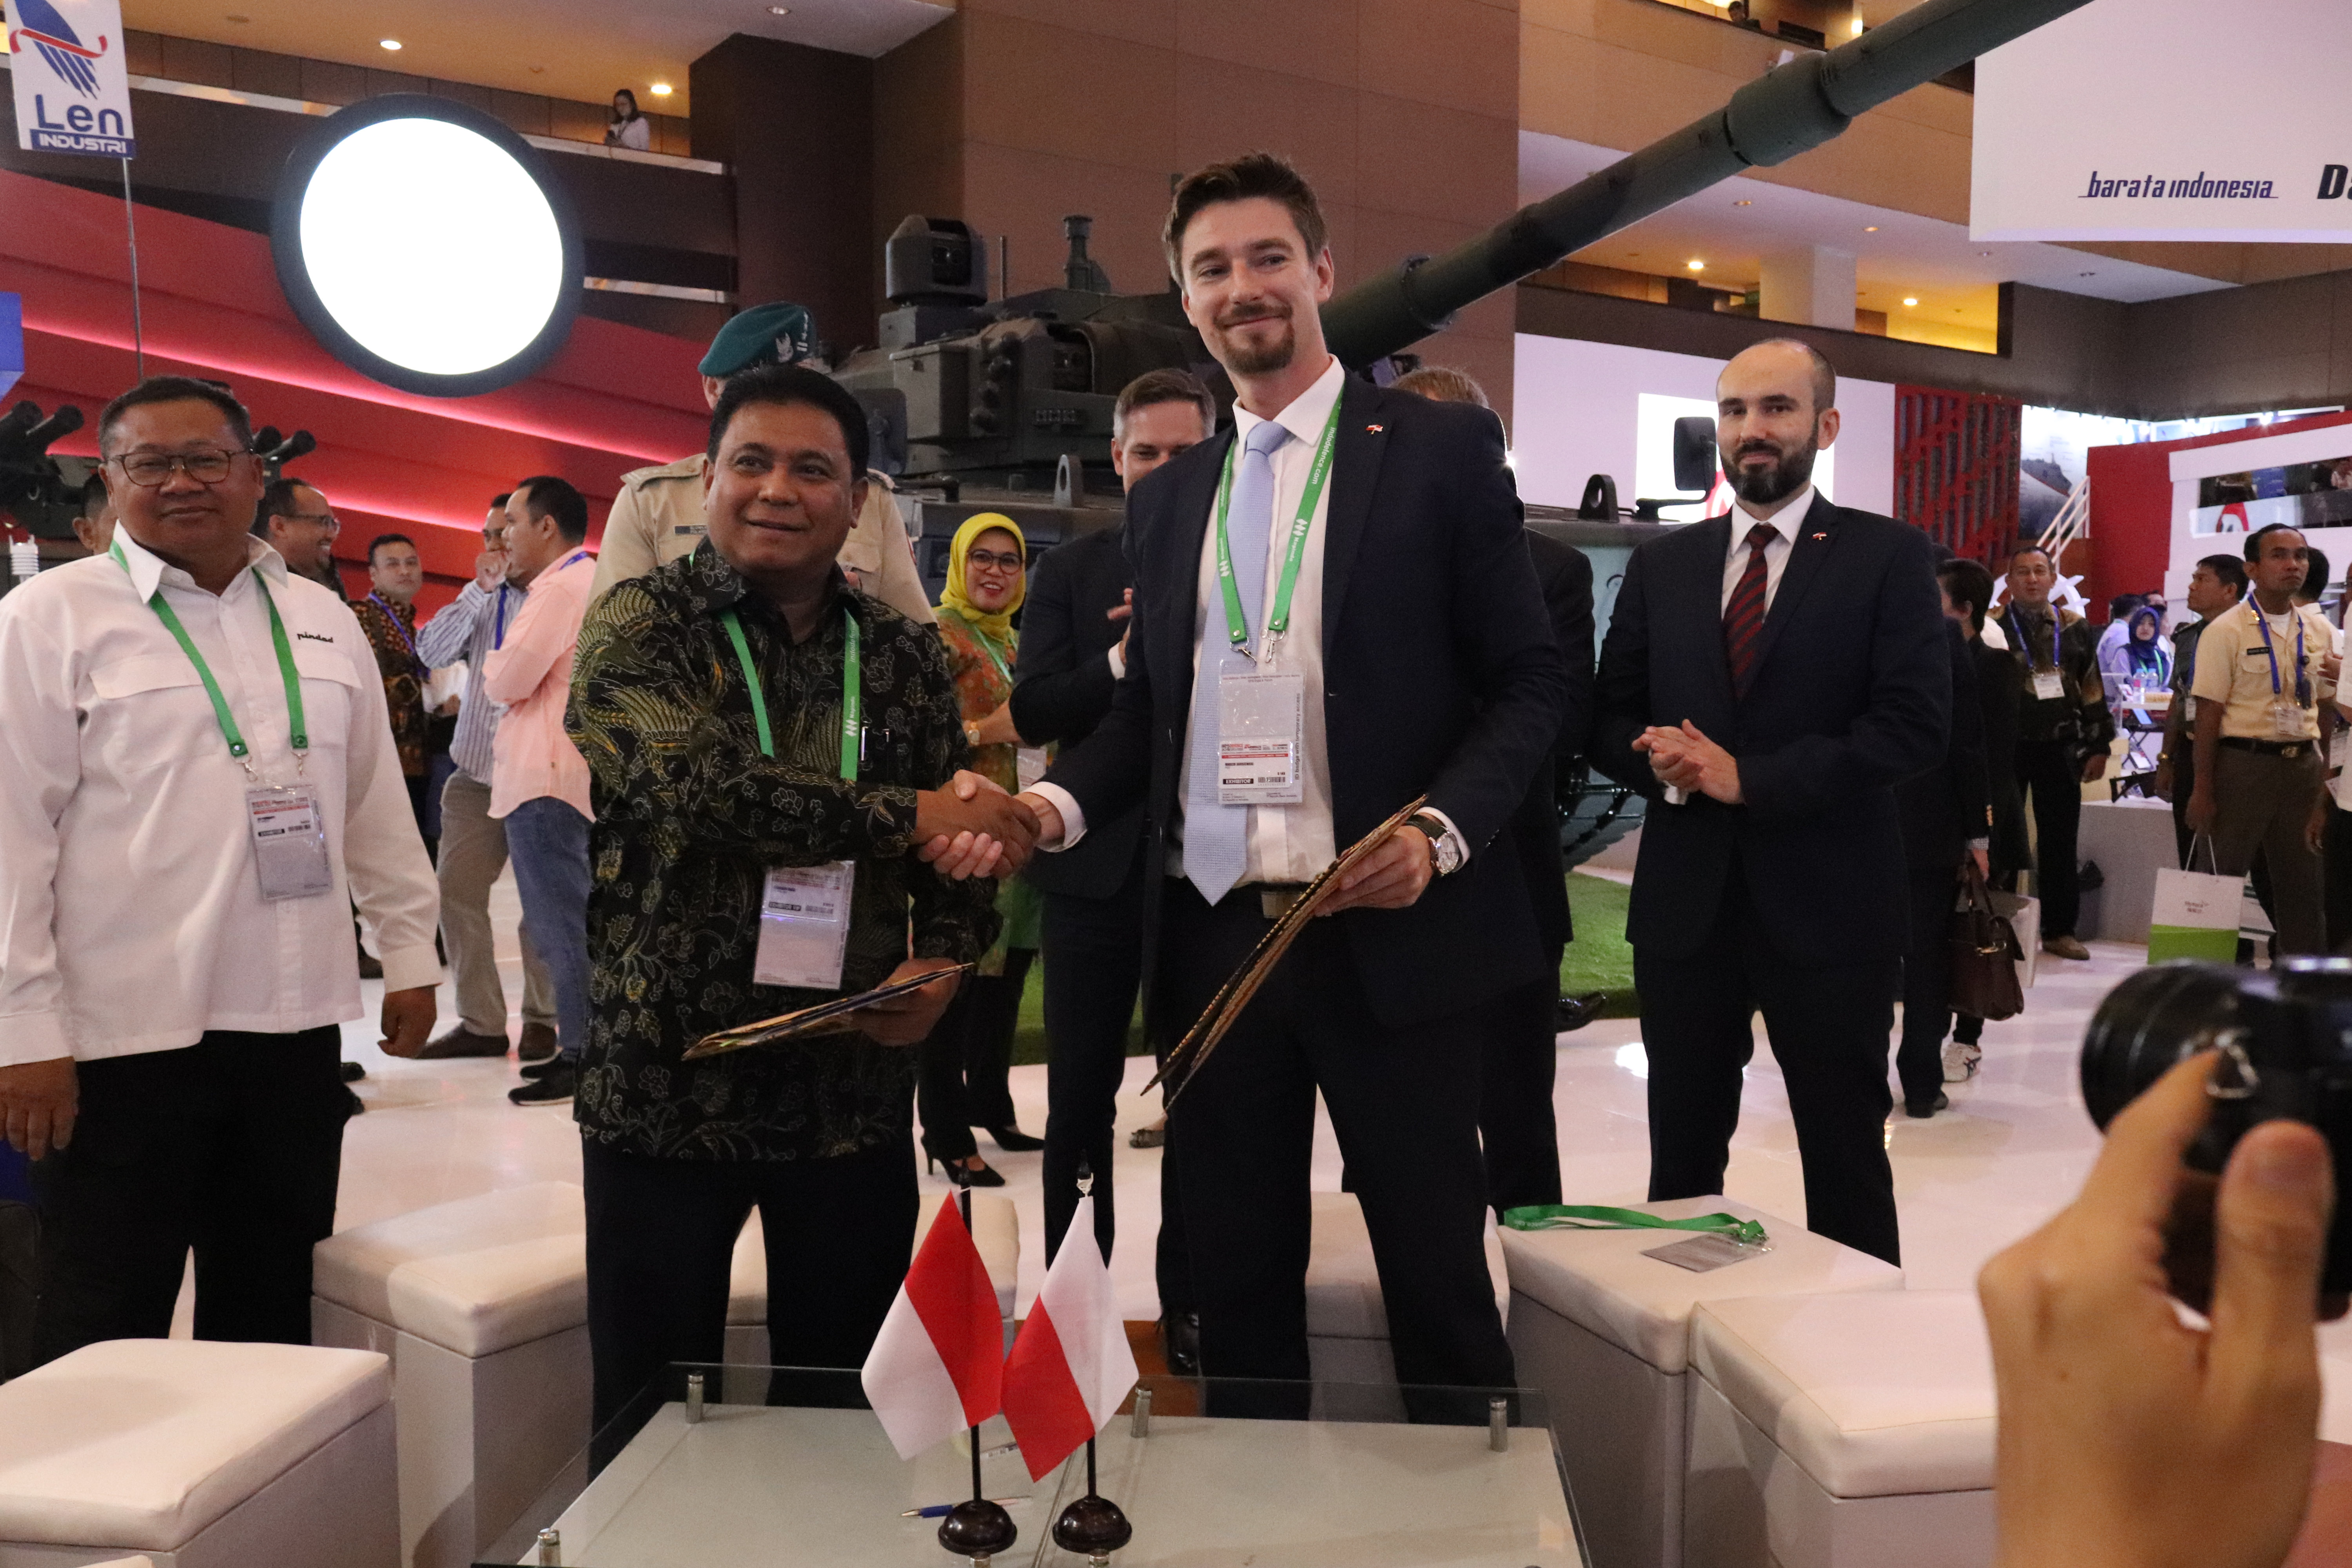 PCO S.A. signed a memorandum of understanding with Pindad (Persero) company